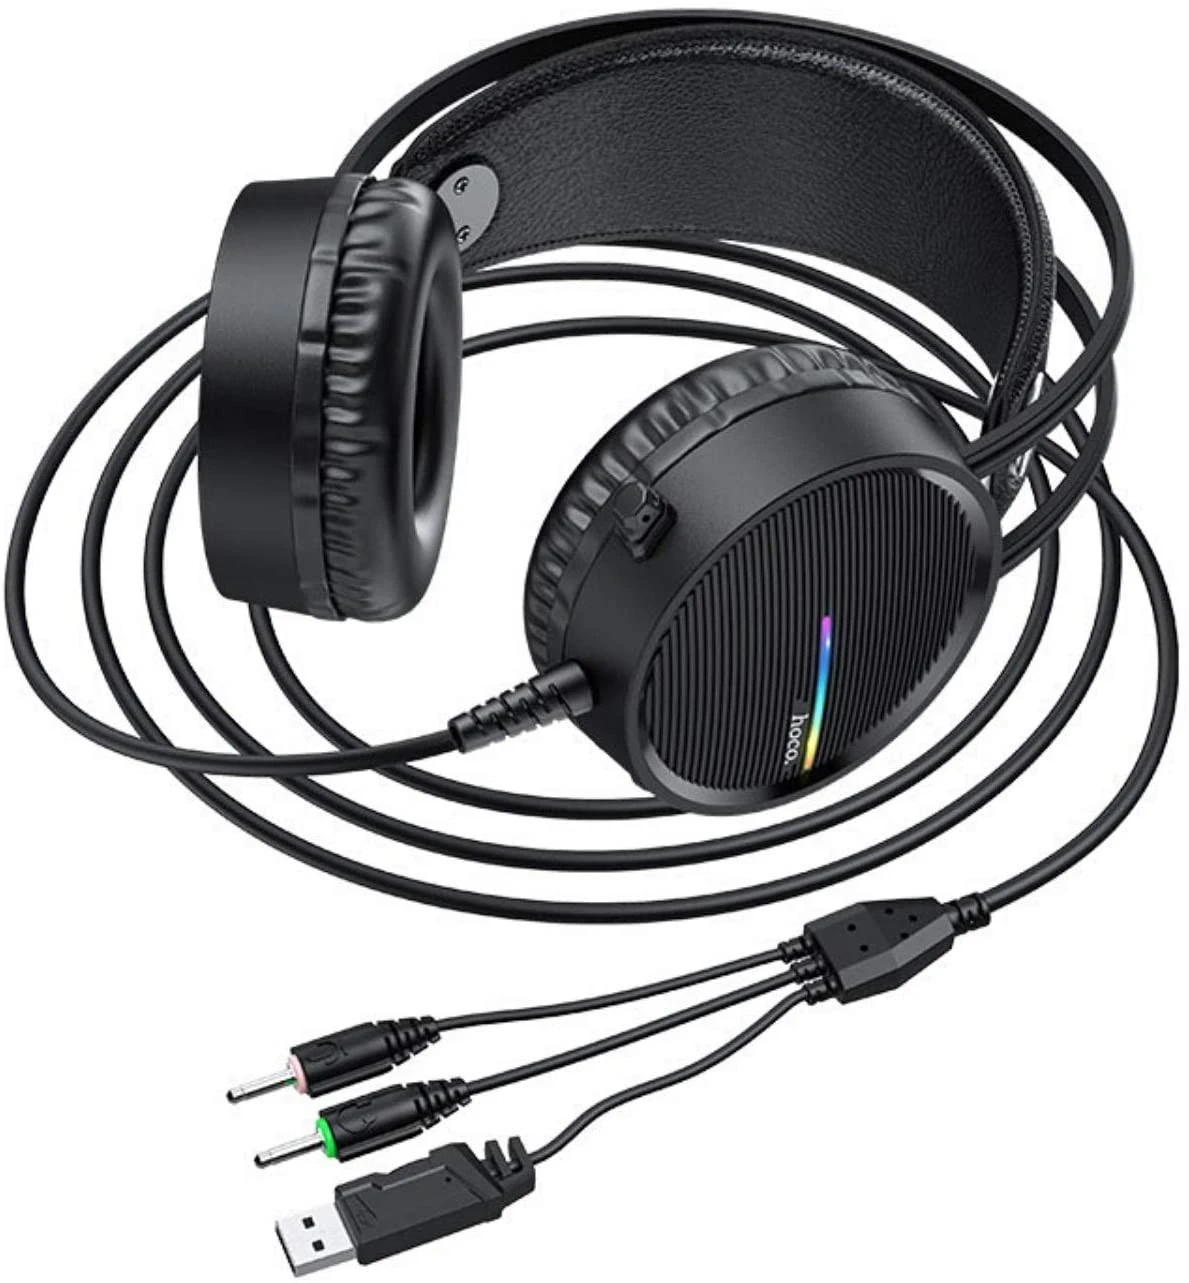 Hoco W100 Wired Headphone With Omnidirectional Microphone - Black Color